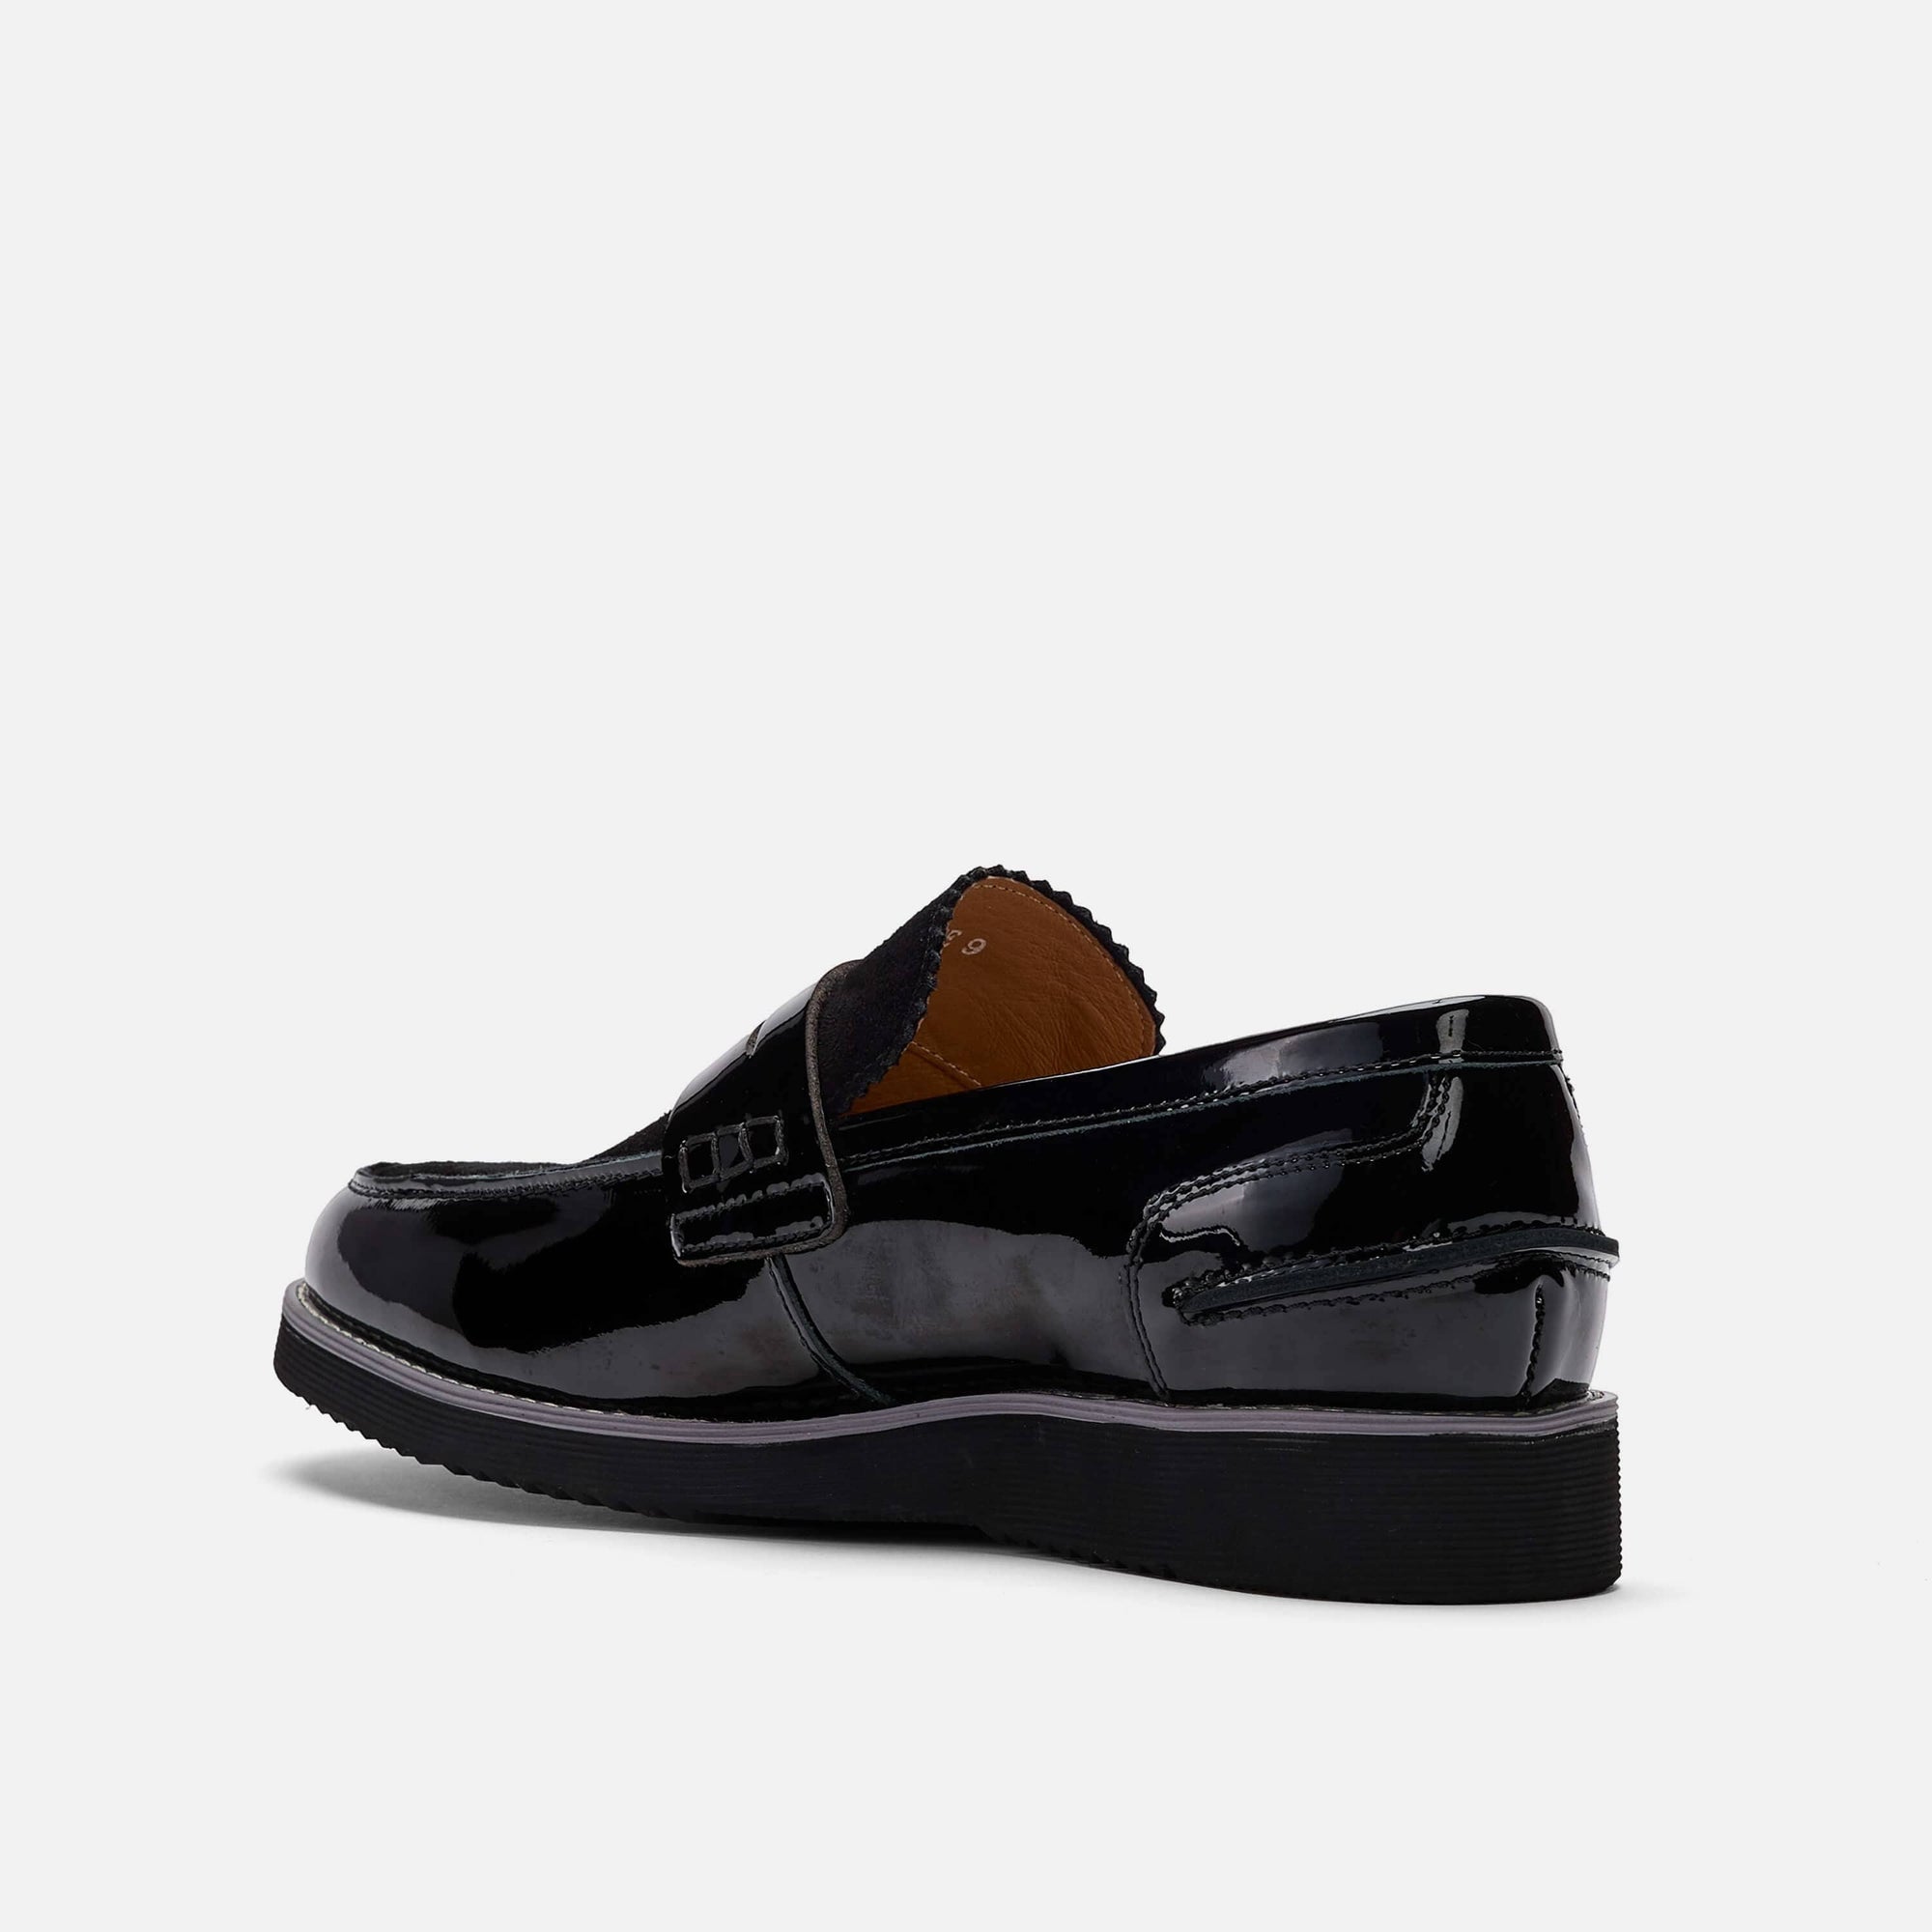 Abe Black Patent Leather Penny Loafer Sneakers